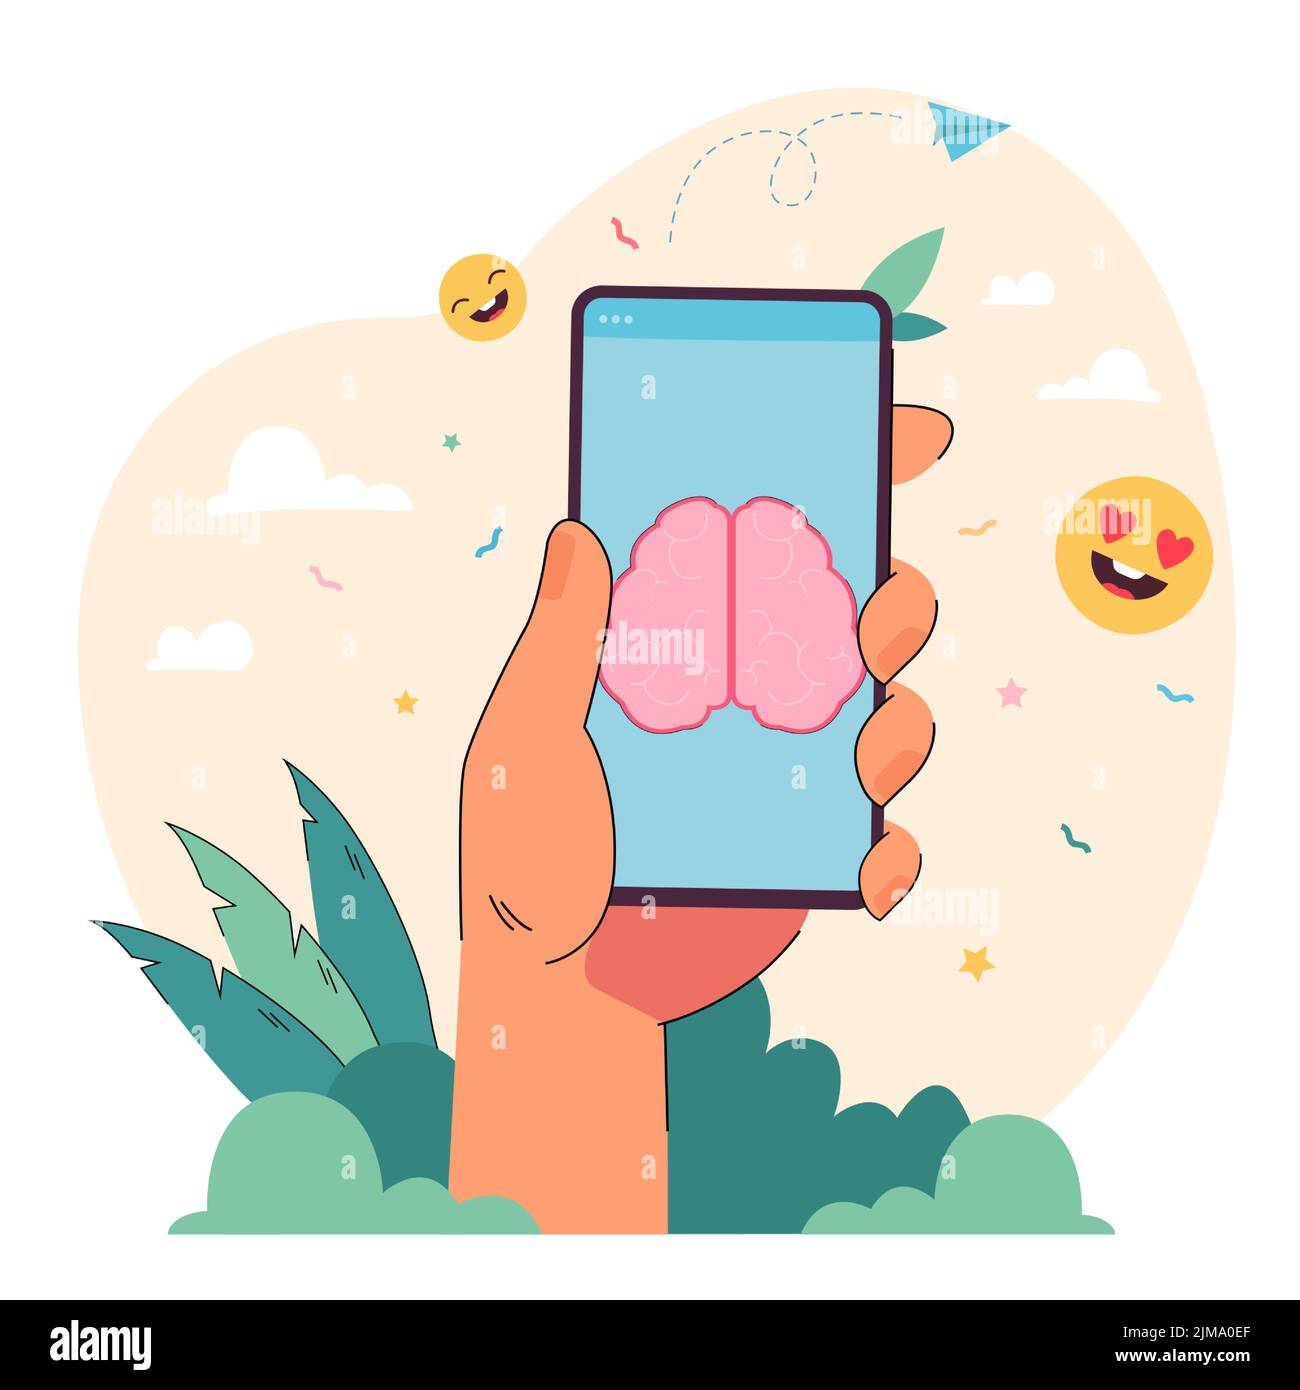 Smiley faces and hand holding telephone with brain on screen. Person learning information through app or service flat vector illustration. Technology, Stock Vector